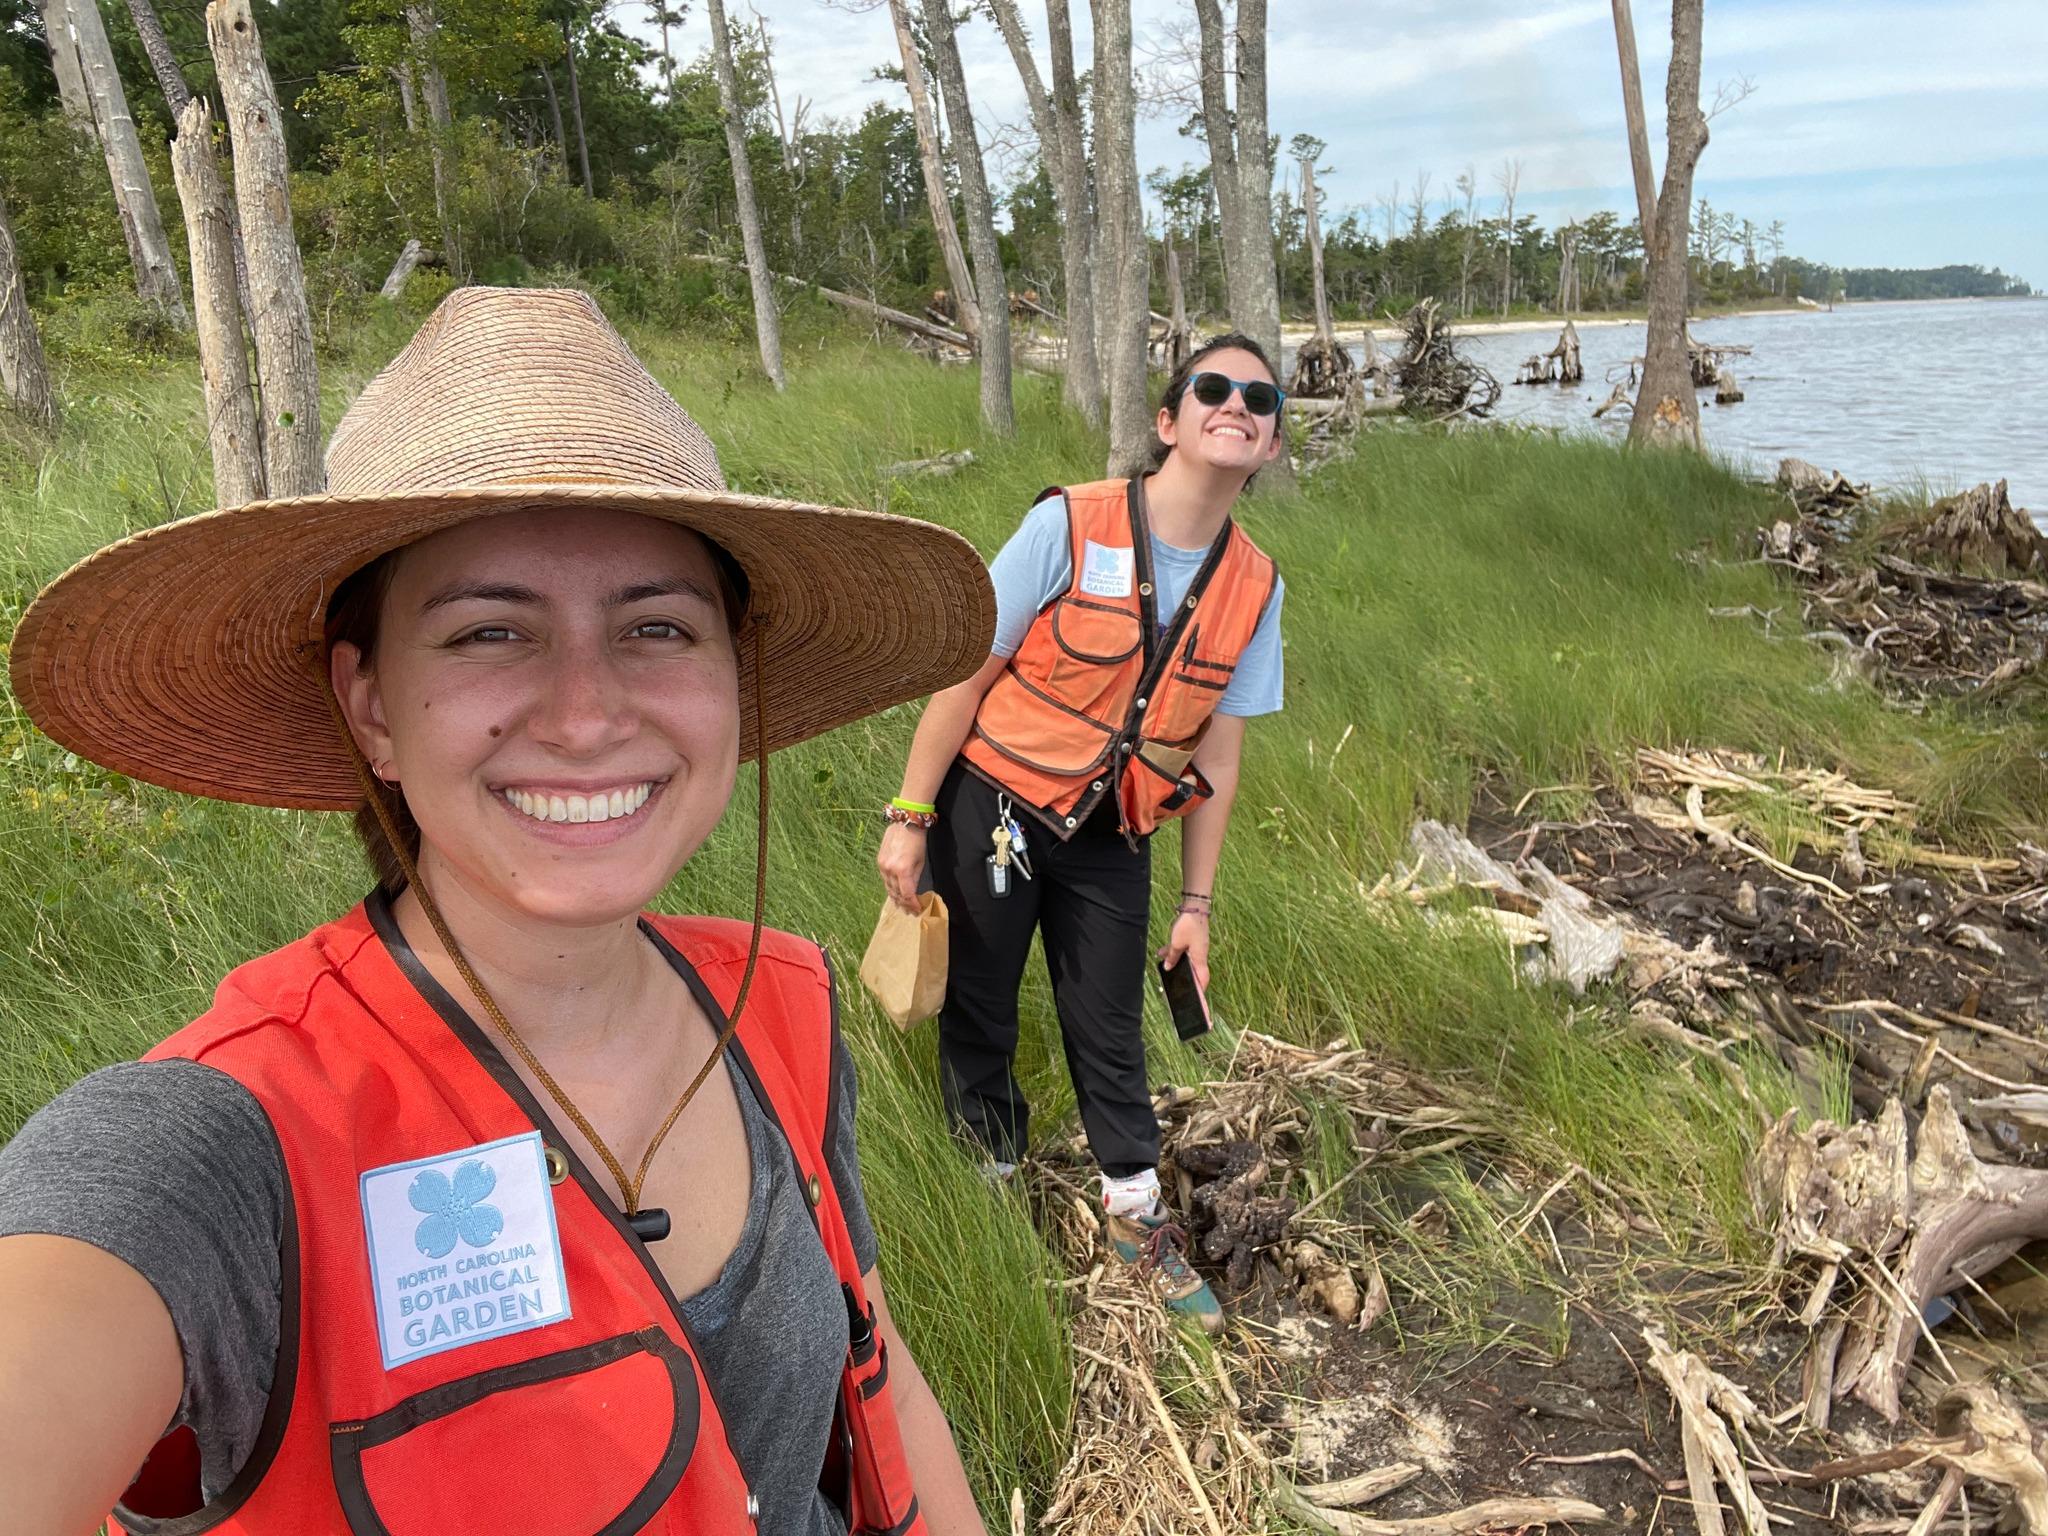 Our 2022 Plant Conservation Technicians, Madison and Aria, on a seed collecting trip in the Coastal Plain.